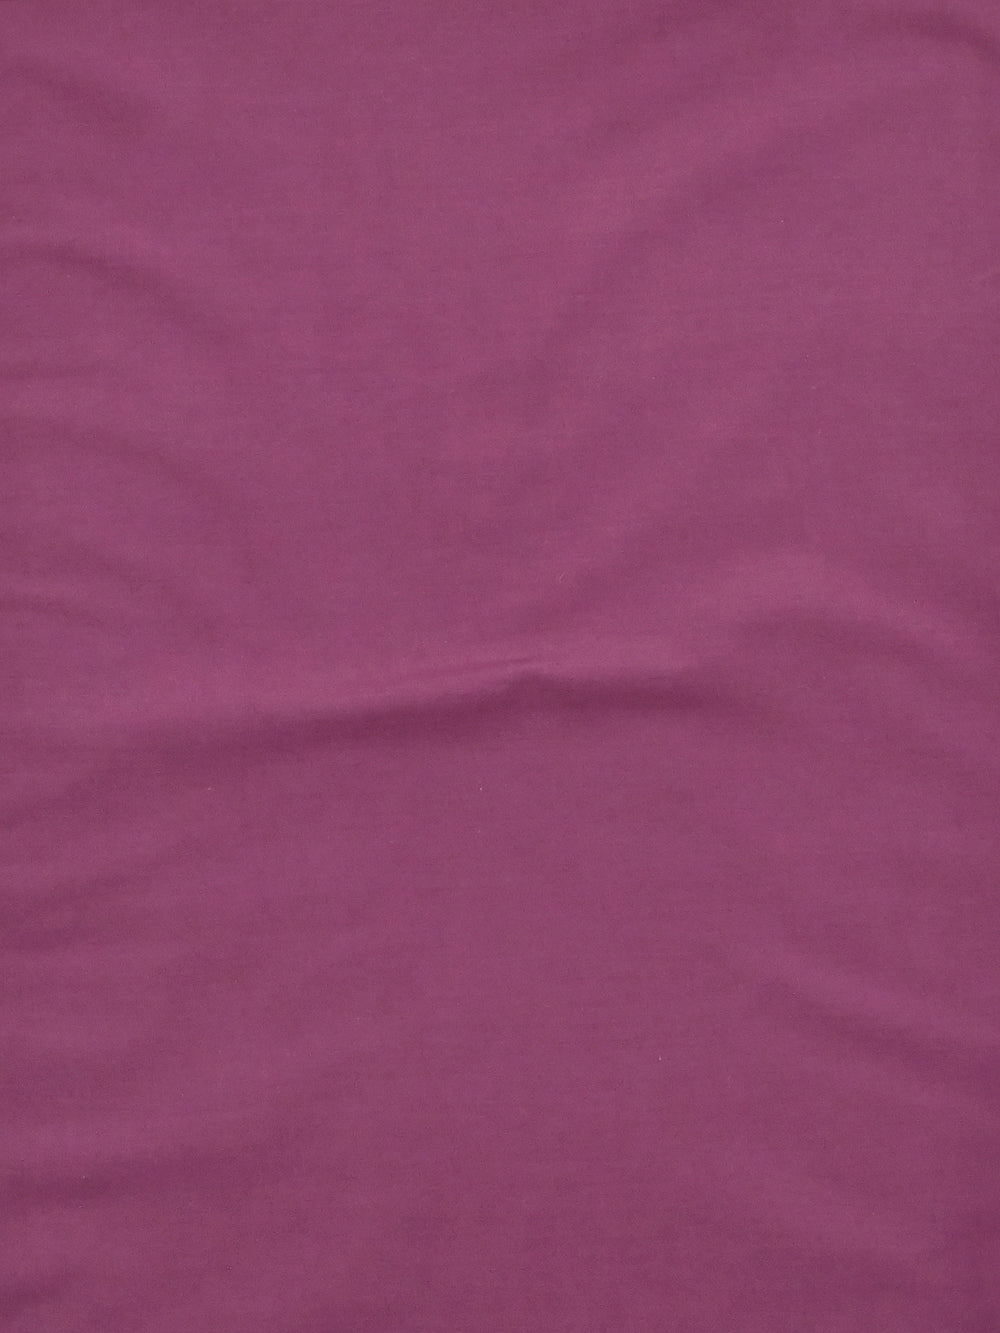 C-37 Purple Red Shade Solid Dyed Cotton Cambric Fabric